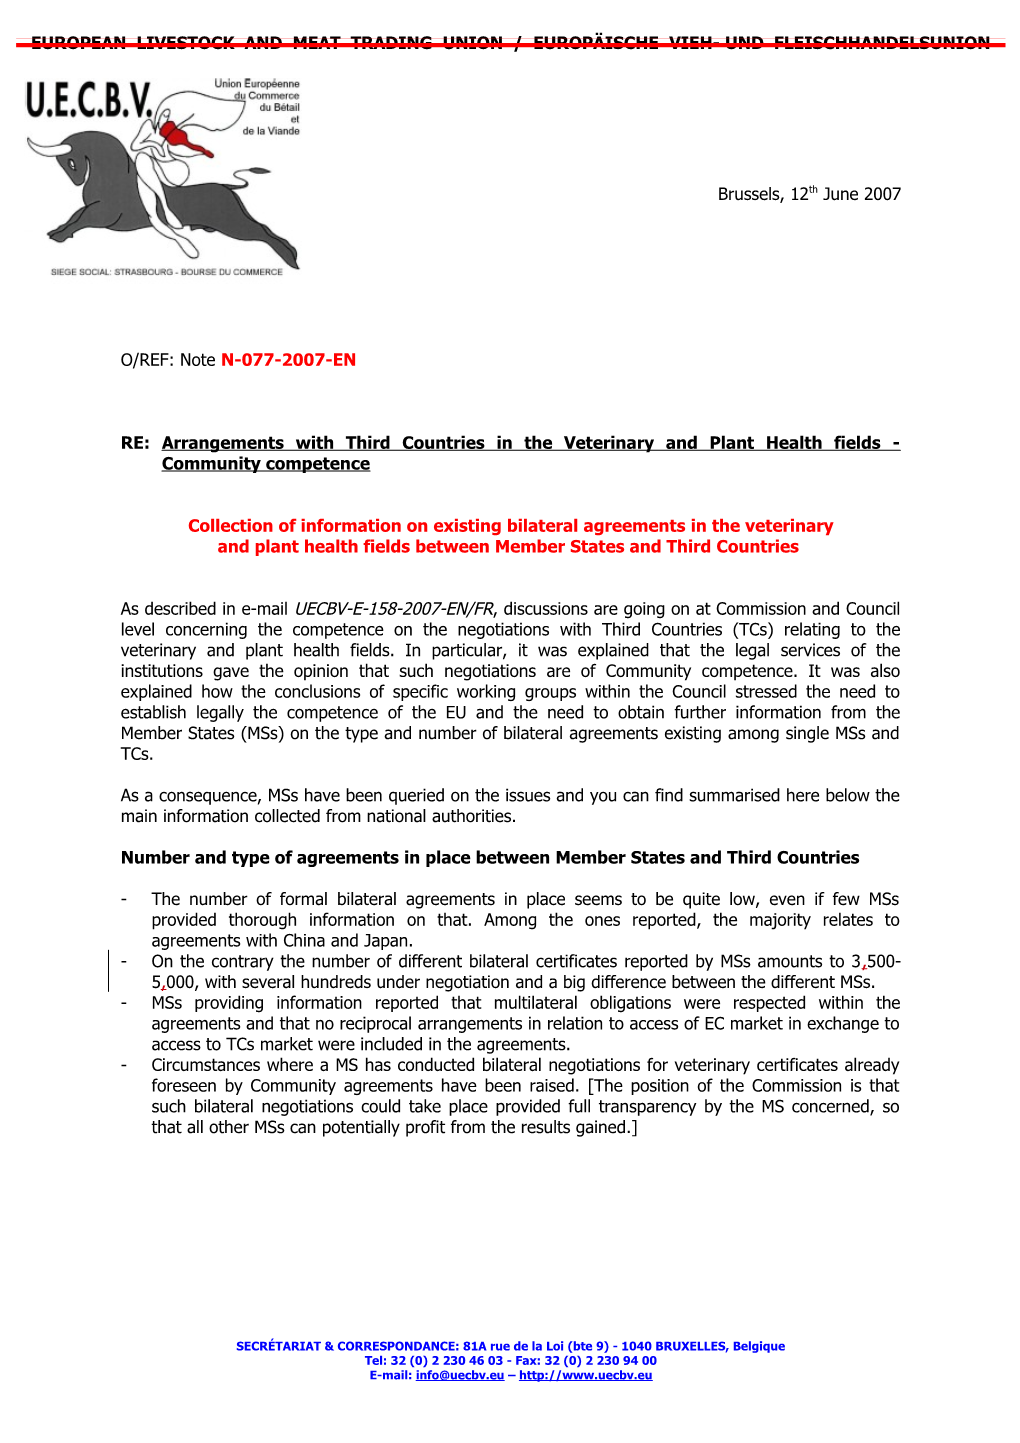 Collection of Information on Existing Bilateral Agreements in the Veterinary